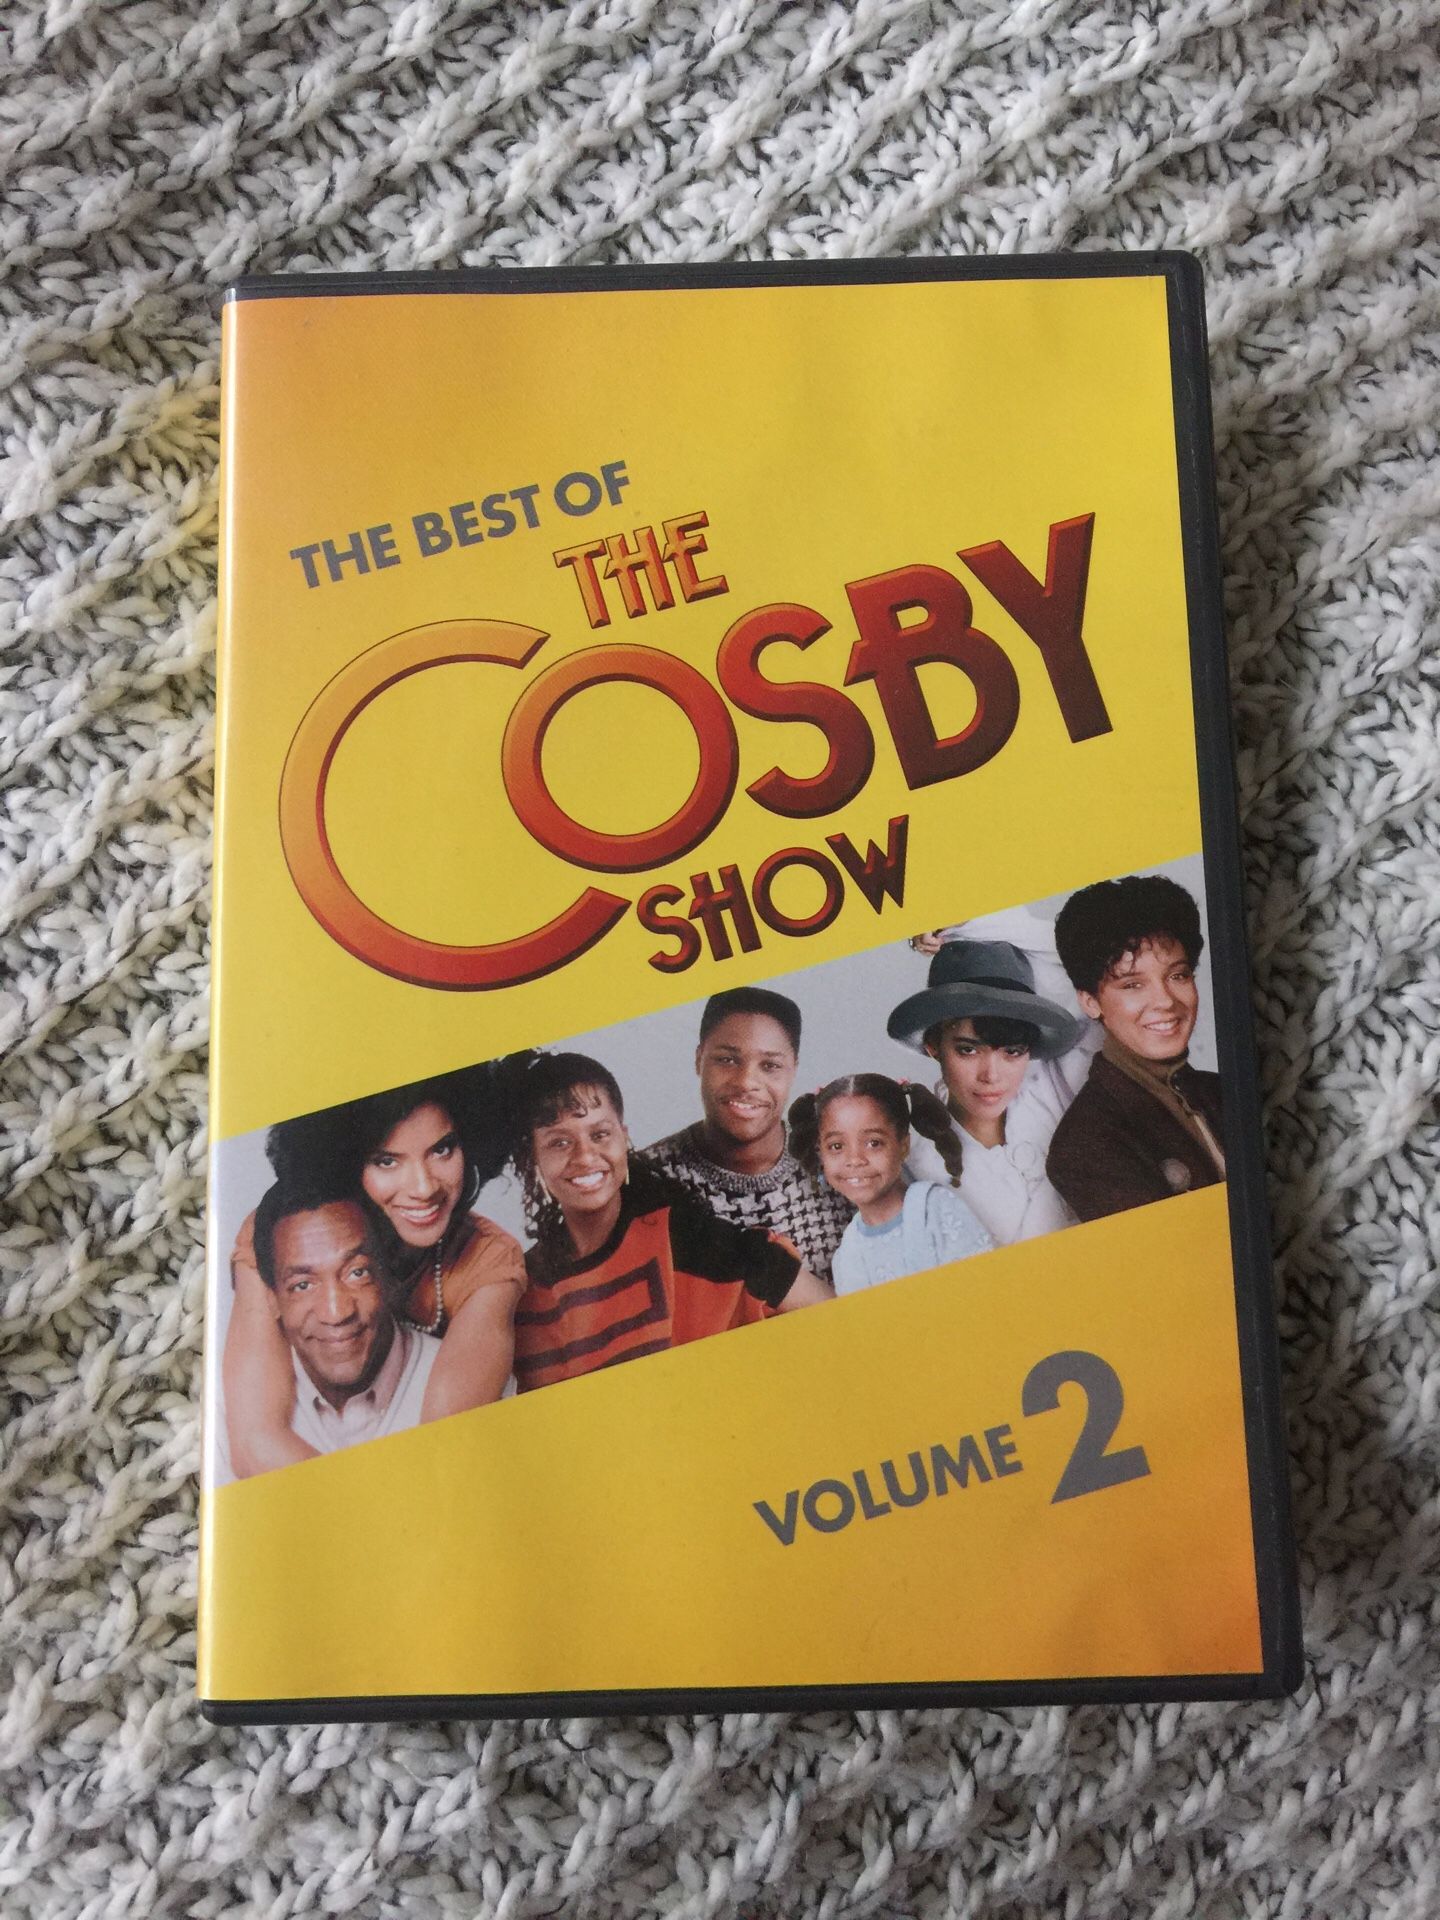 The Best of the Cosby Show Vol. 2